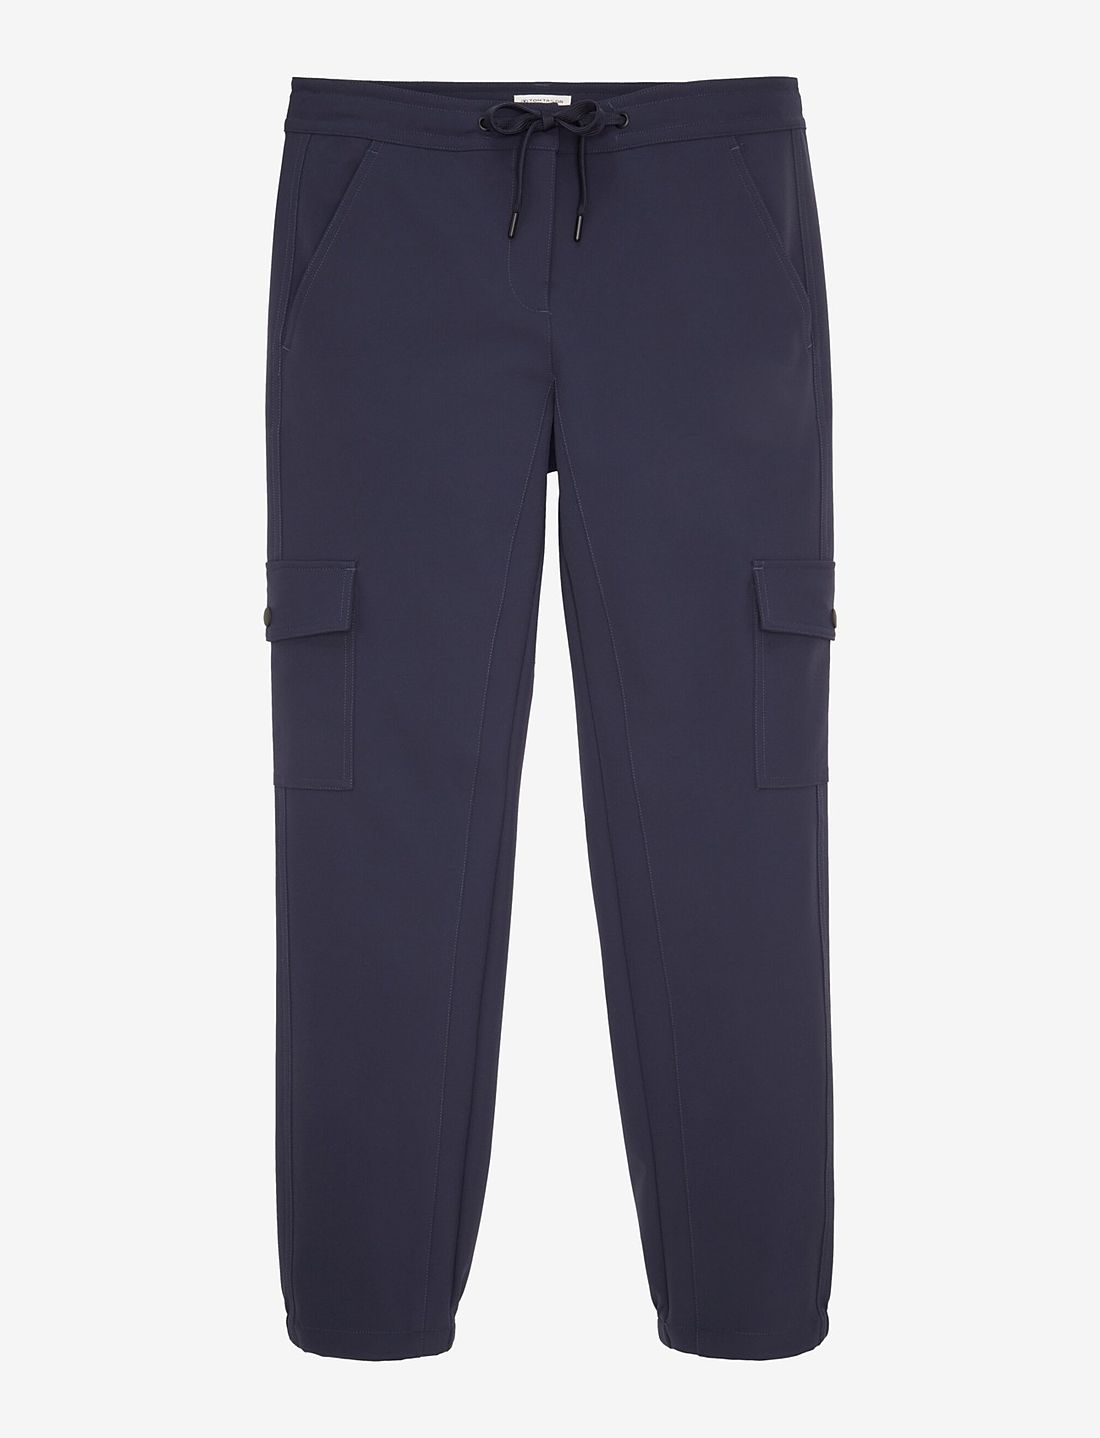 Tom Tailor Pants Casual Cargo - Trousers